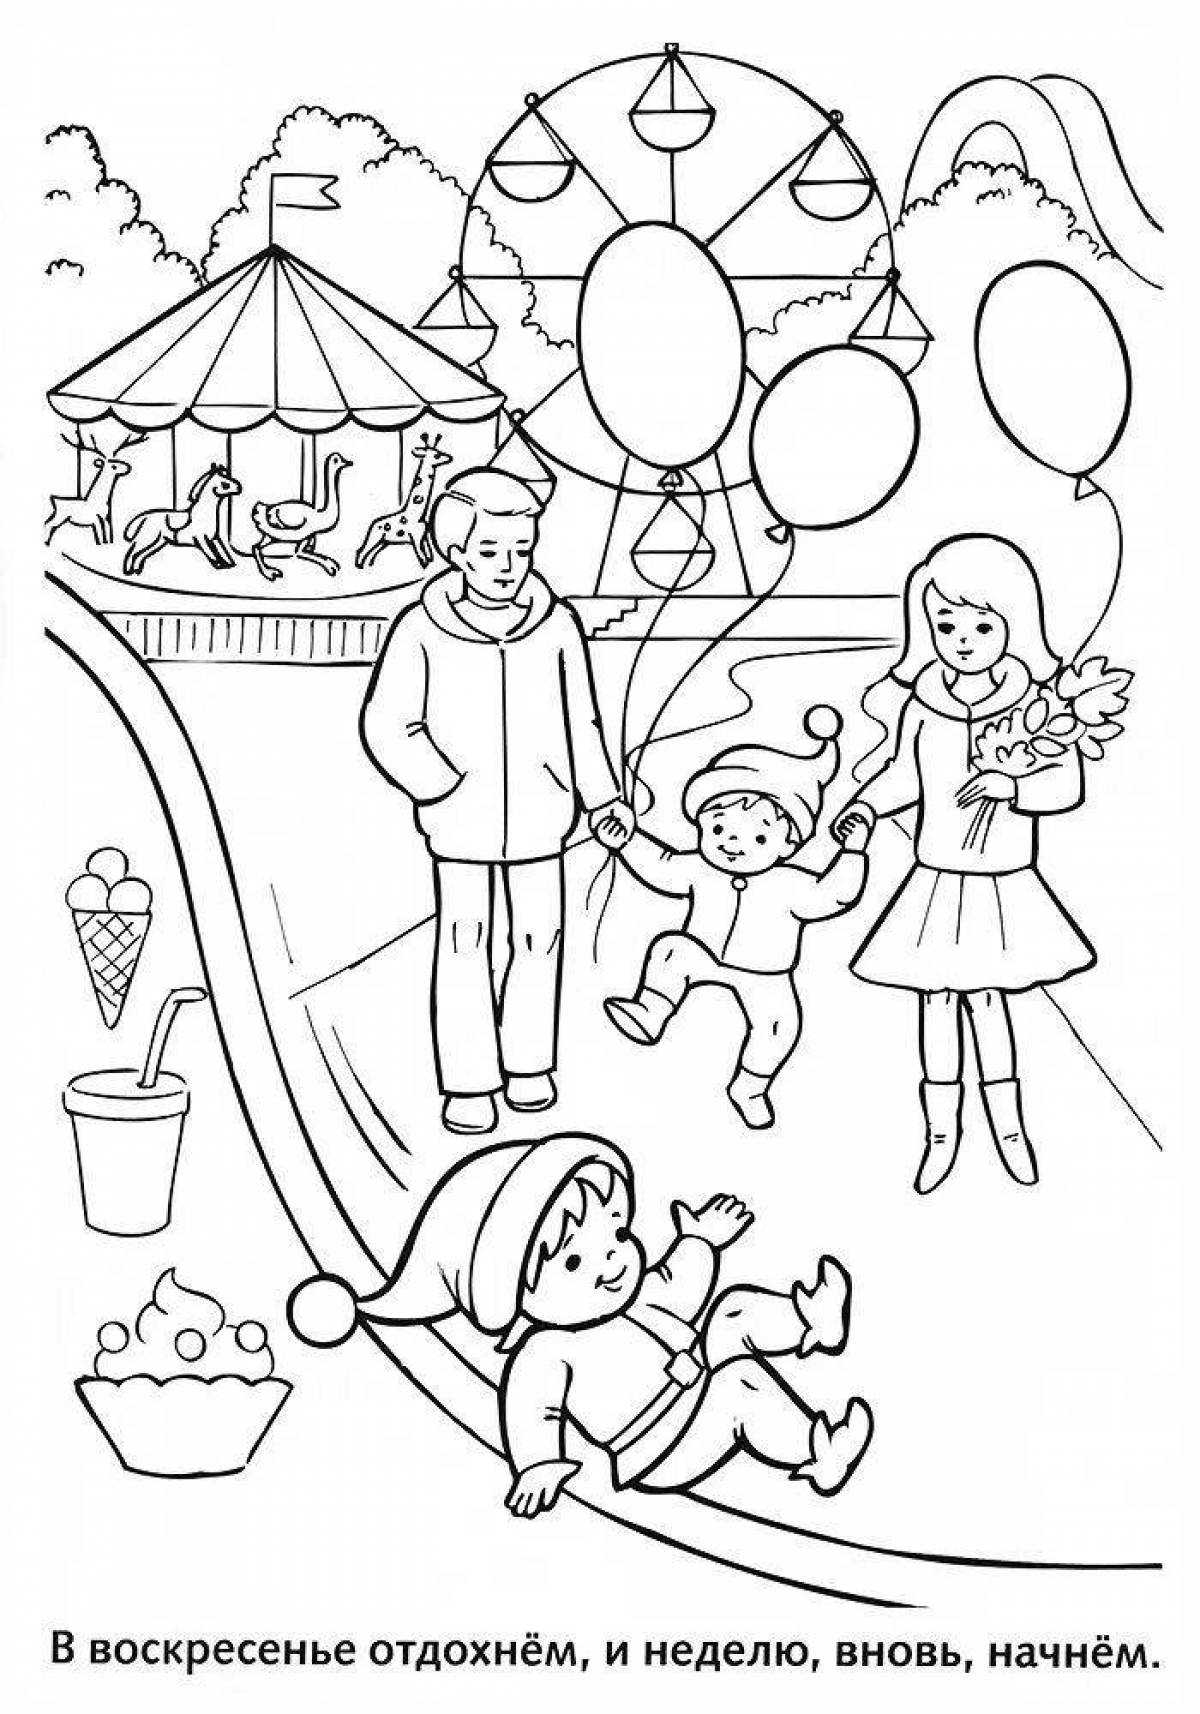 Caring family coloring page